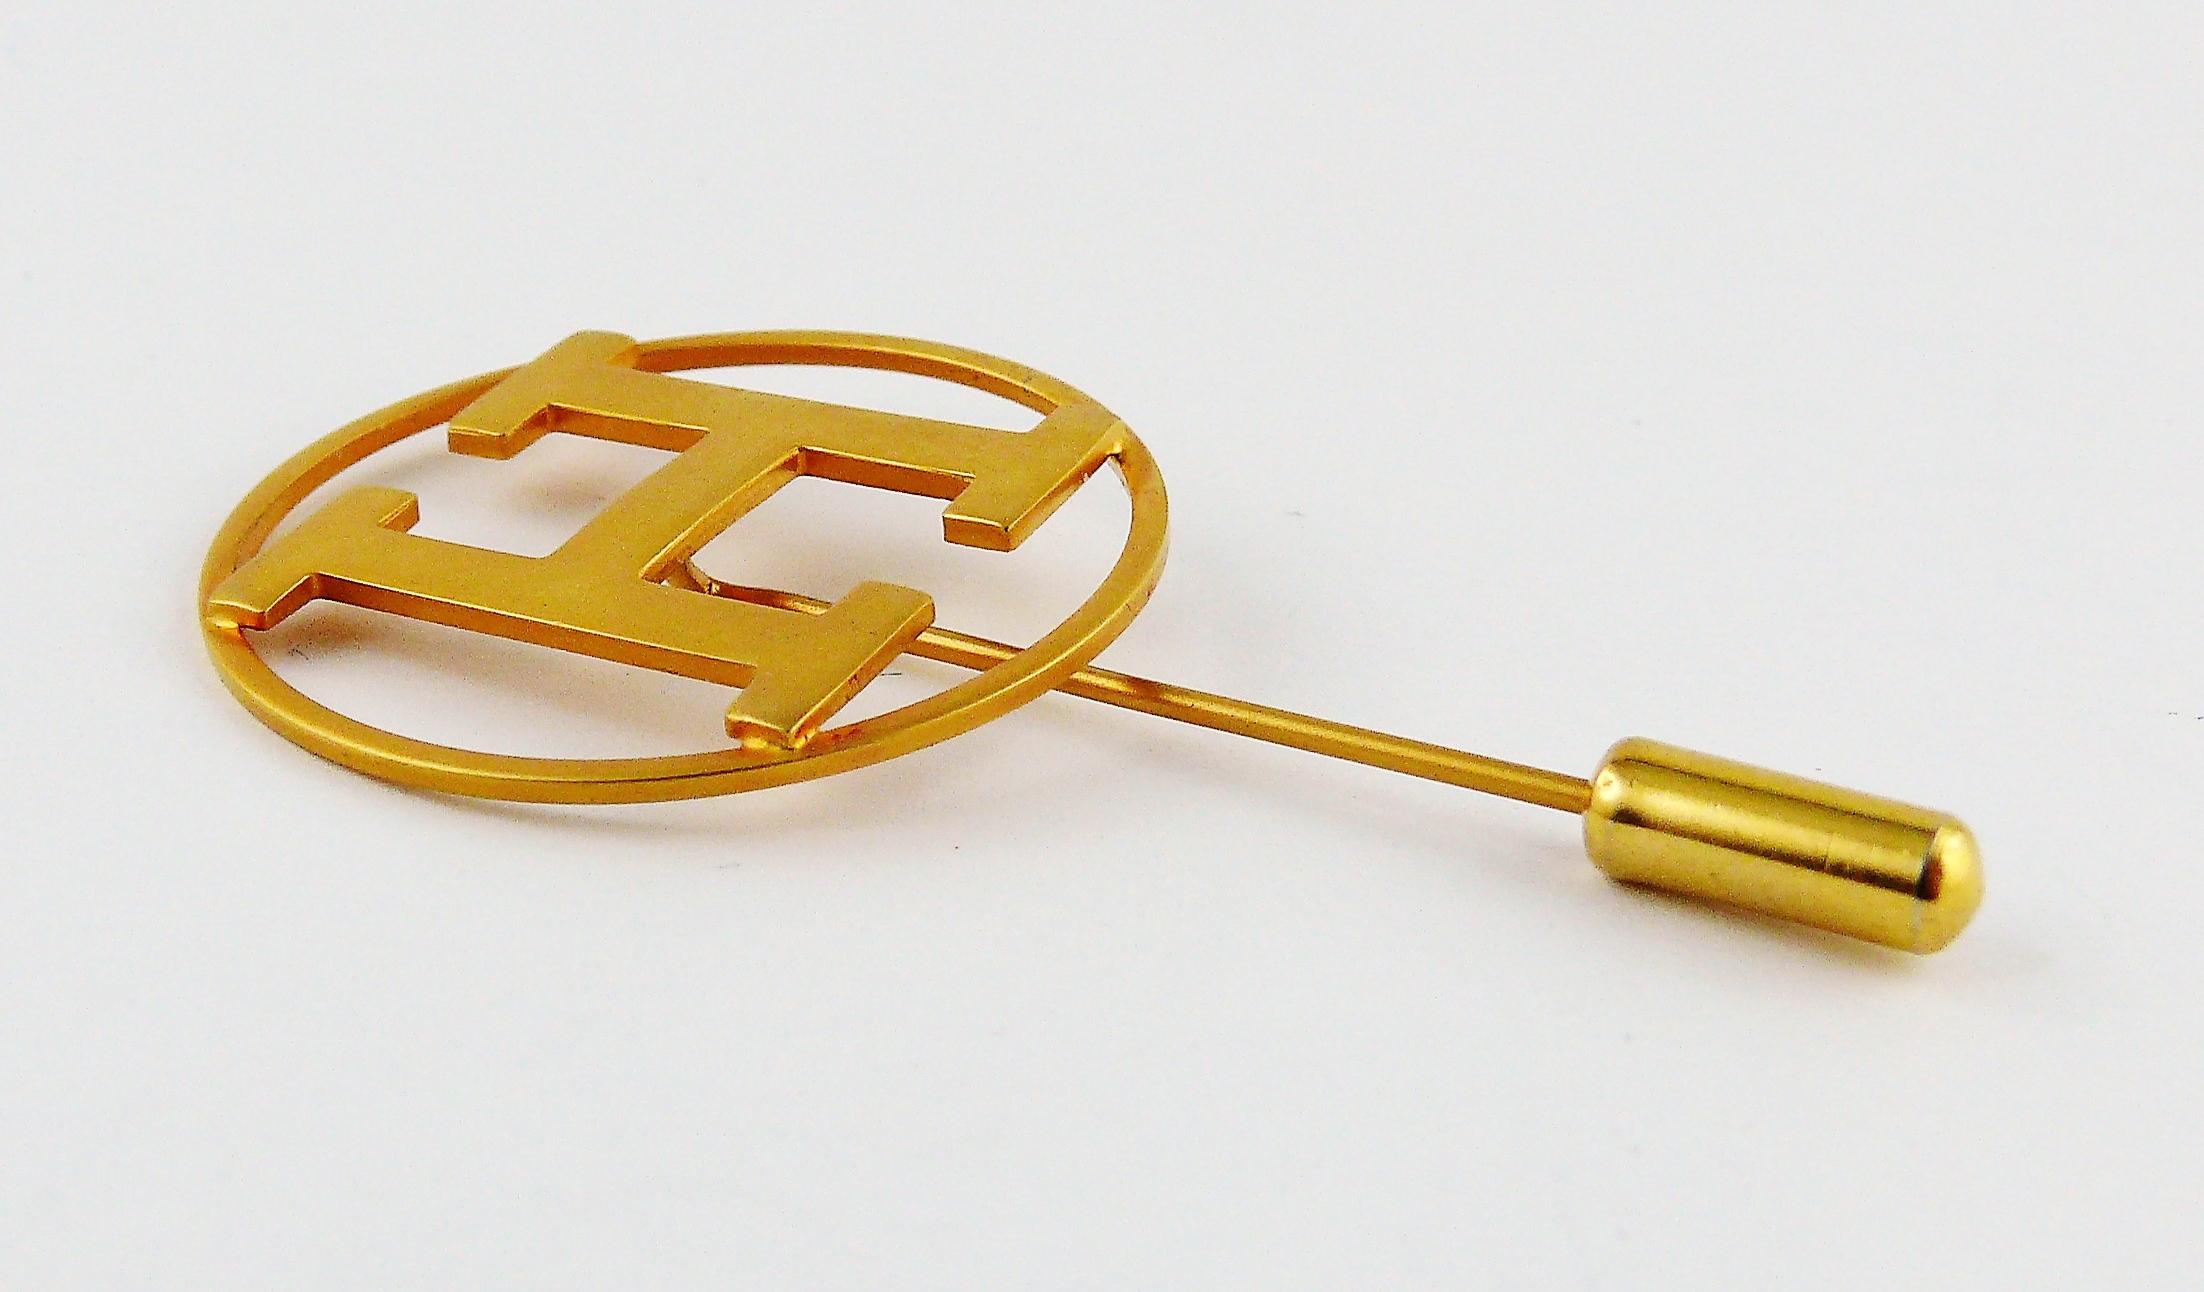 HERMES vintage matte gold toned initial H lapel pin brooch.

Unmarked.

Indicative measurements : height approx. 5.4 cm (2.13 inches) / diameter approx. 2.9 cm (1.14 inches).

JEWELRY CONDITION CHART
- New or never worn : item is in pristine